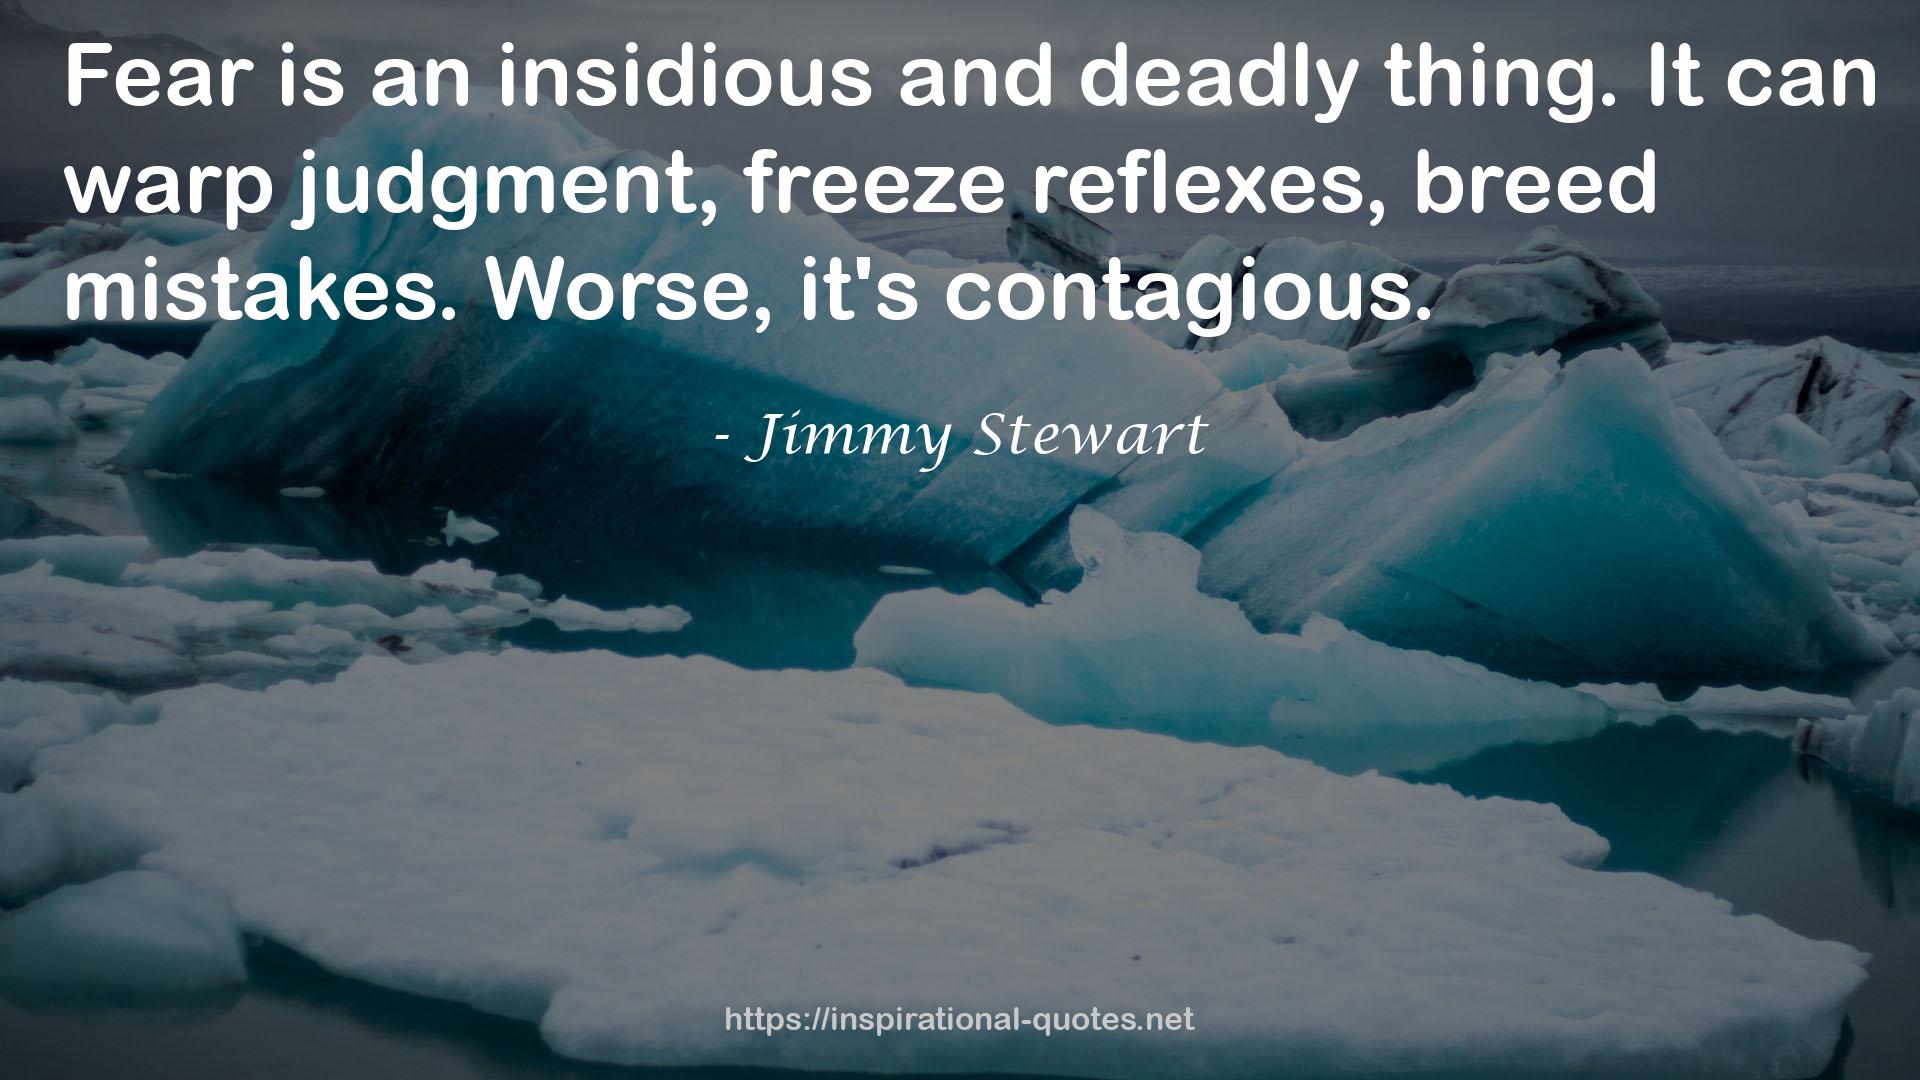 Jimmy Stewart QUOTES